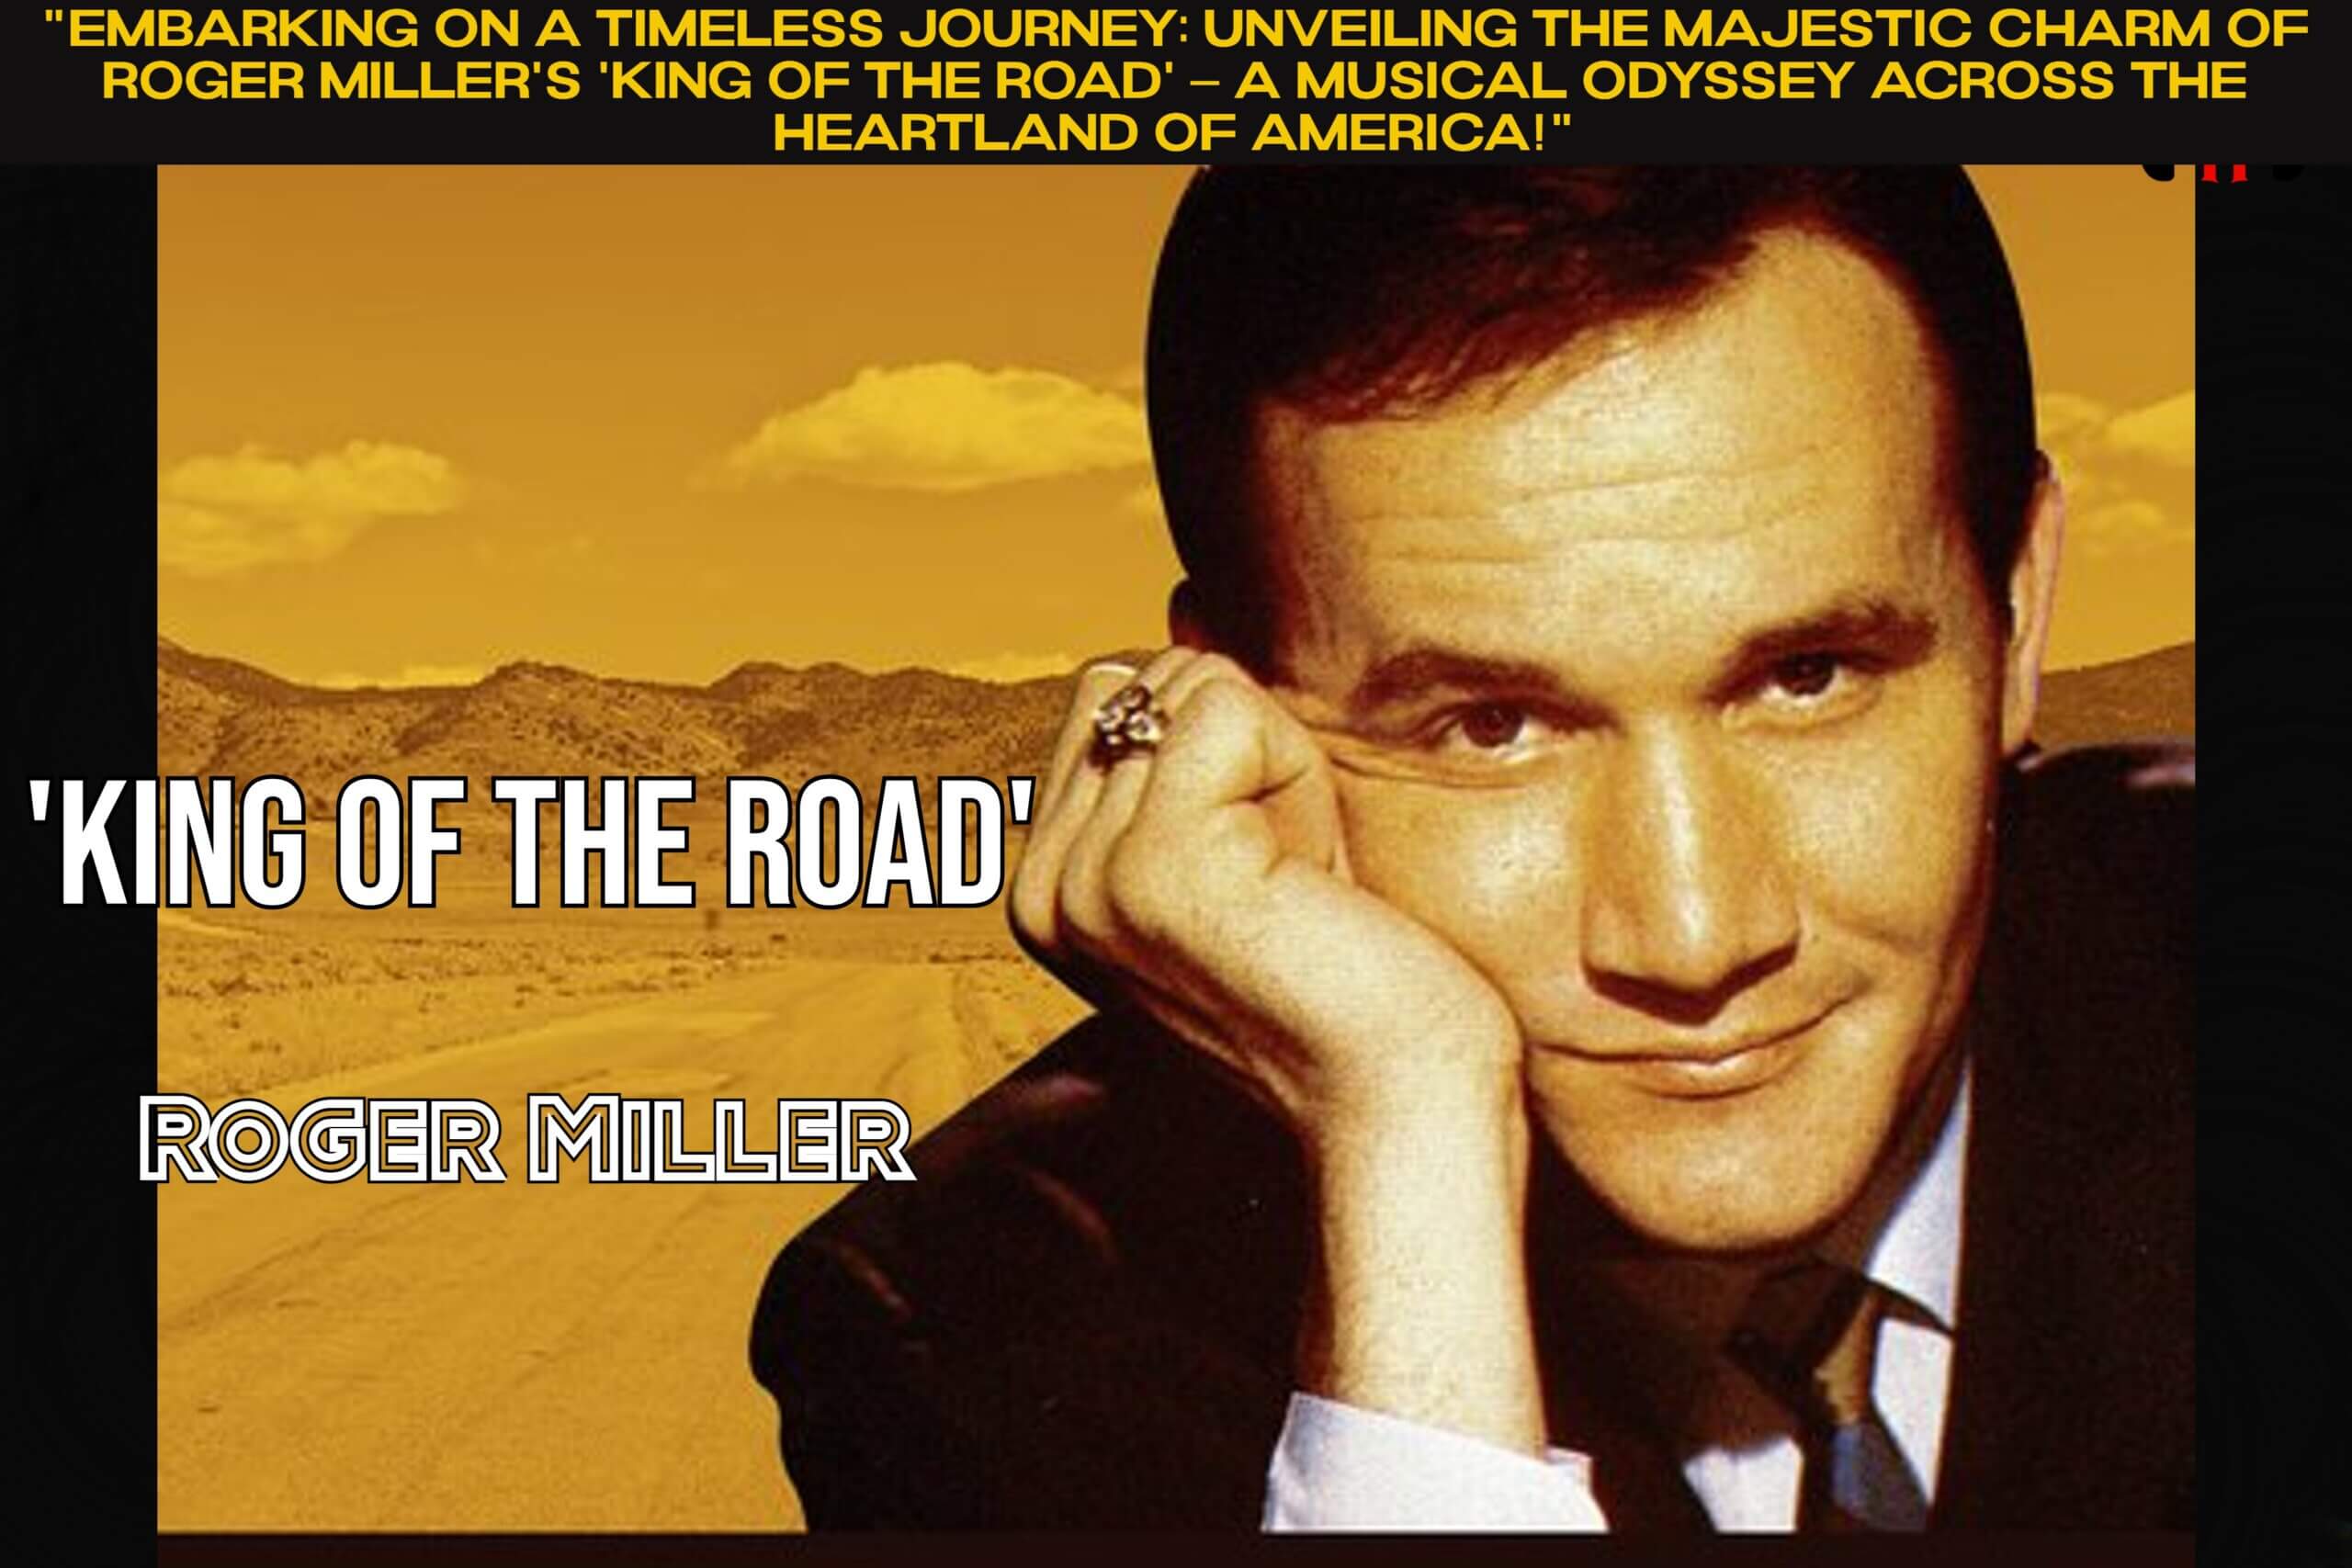 "Embarking on a Timeless Journey: Unveiling the Majestic Charm of Roger Miller's 'King of the Road' – A Musical Odyssey Across the Heartland of America!"